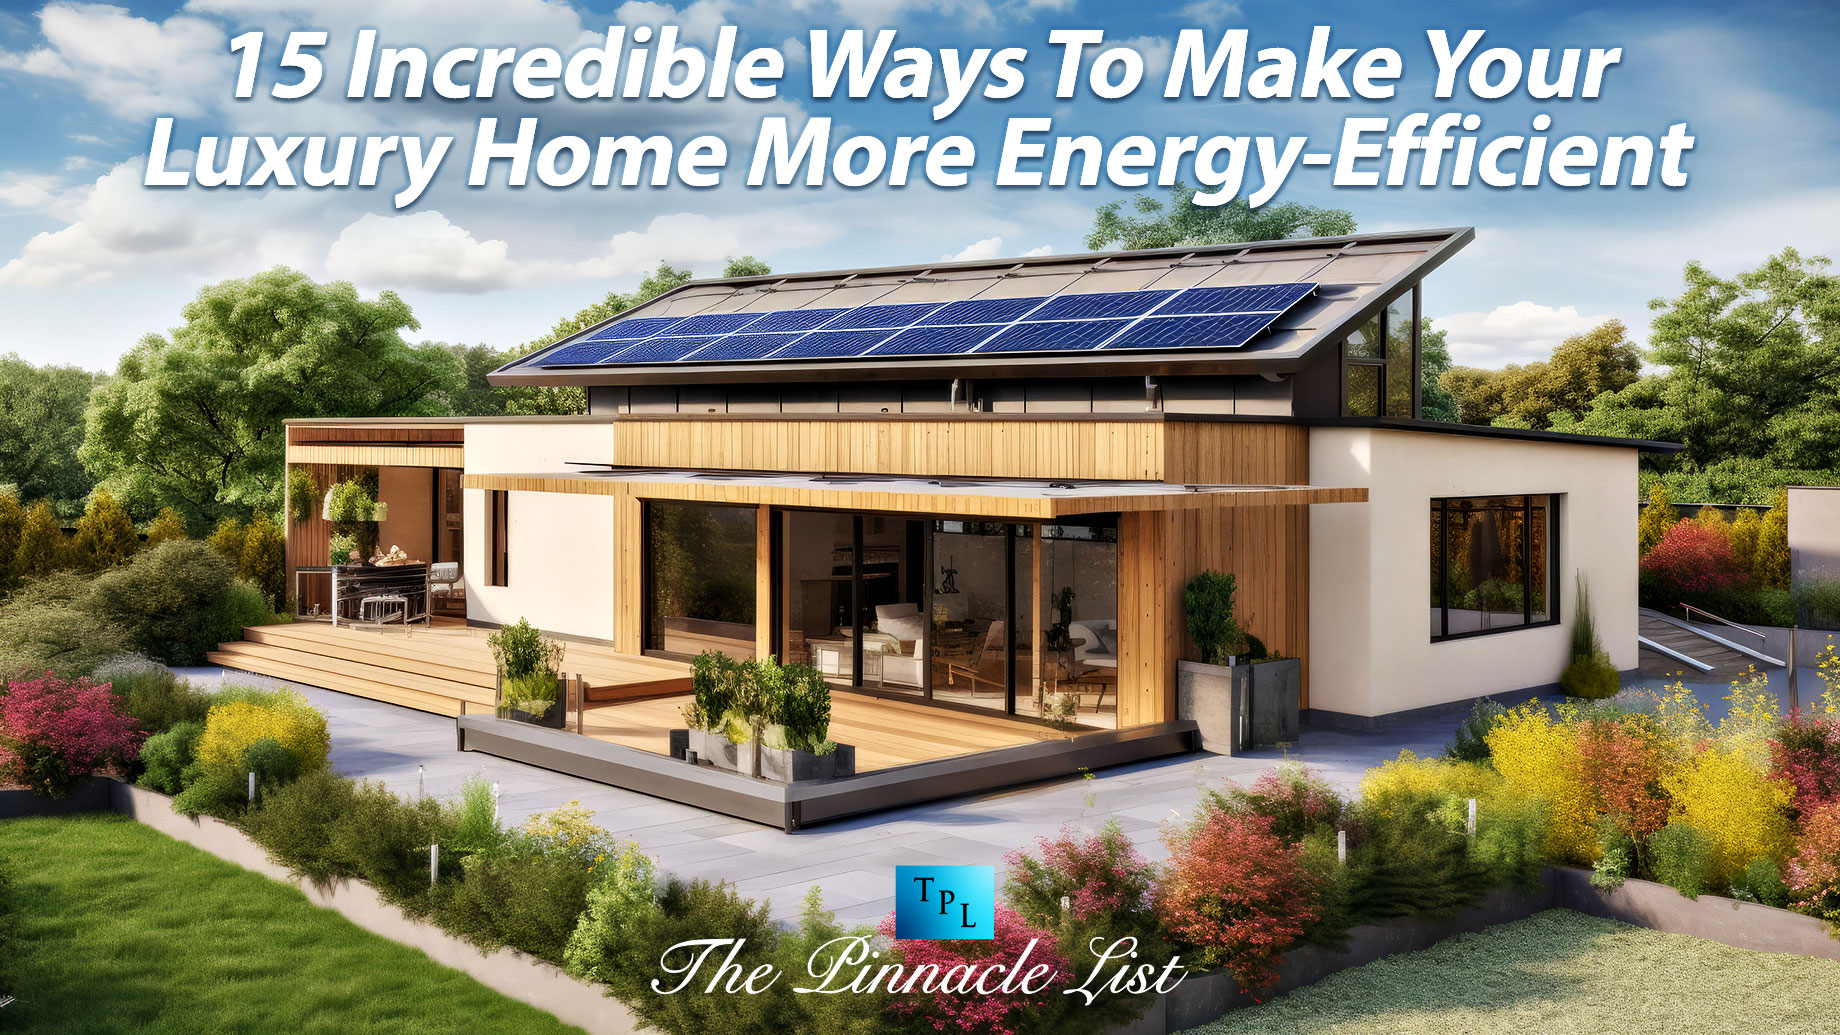 15 Incredible Ways To Make Your
Luxury Home More Energy-Efficient